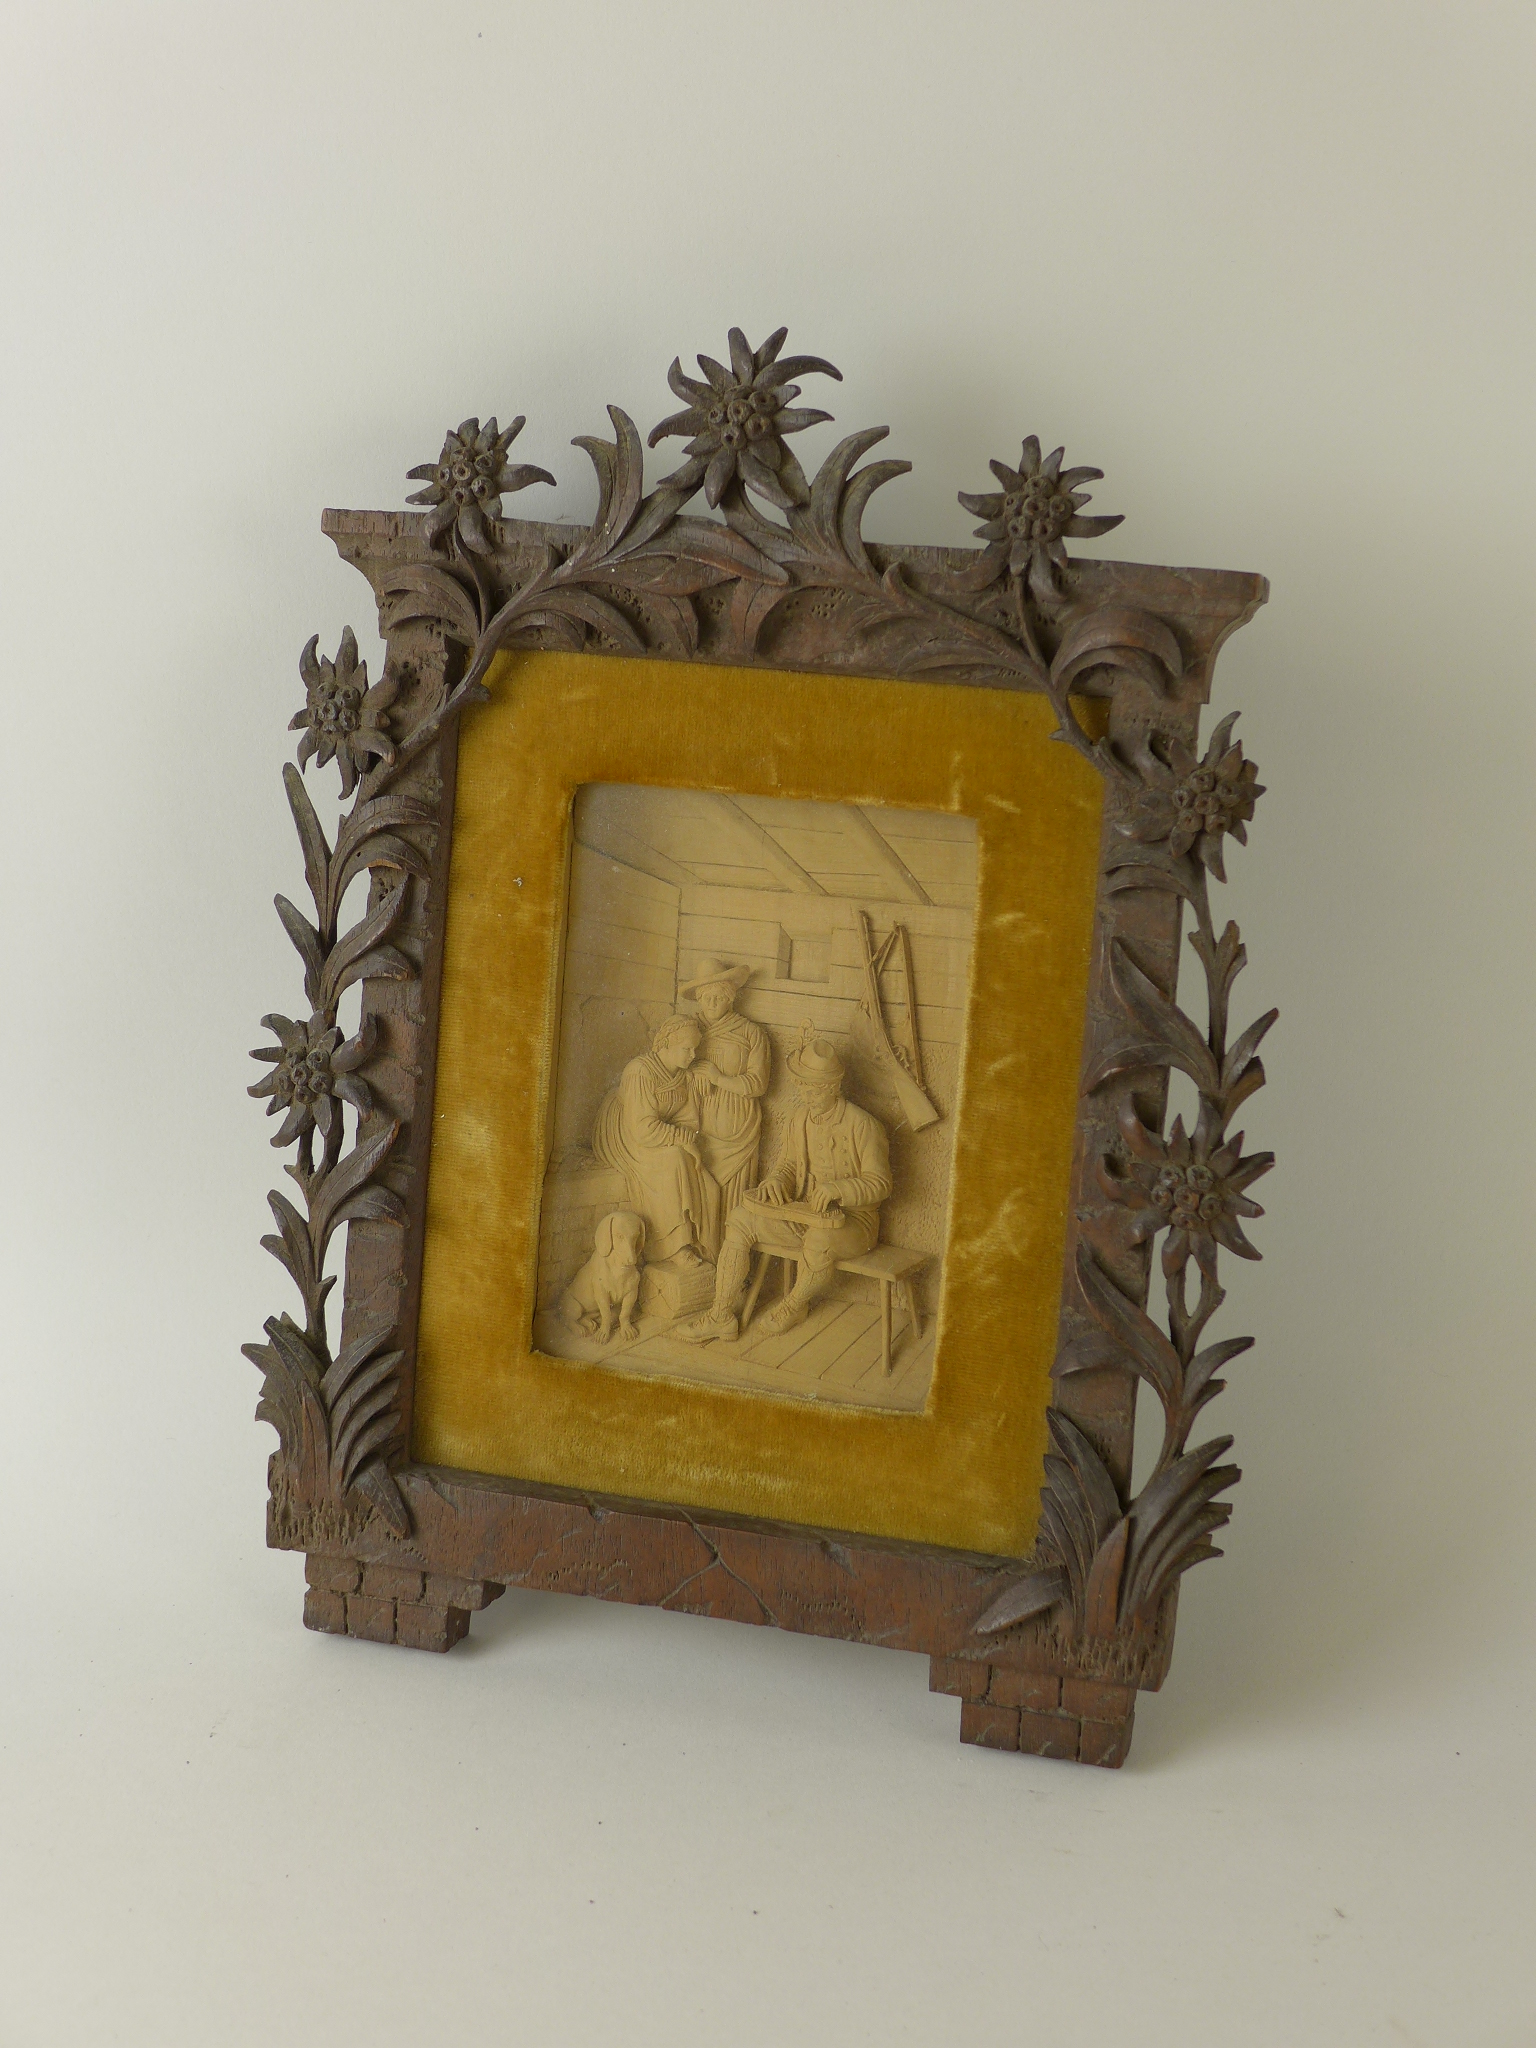 A German carved Frame containing an interior relief figure group of a man playing a musical